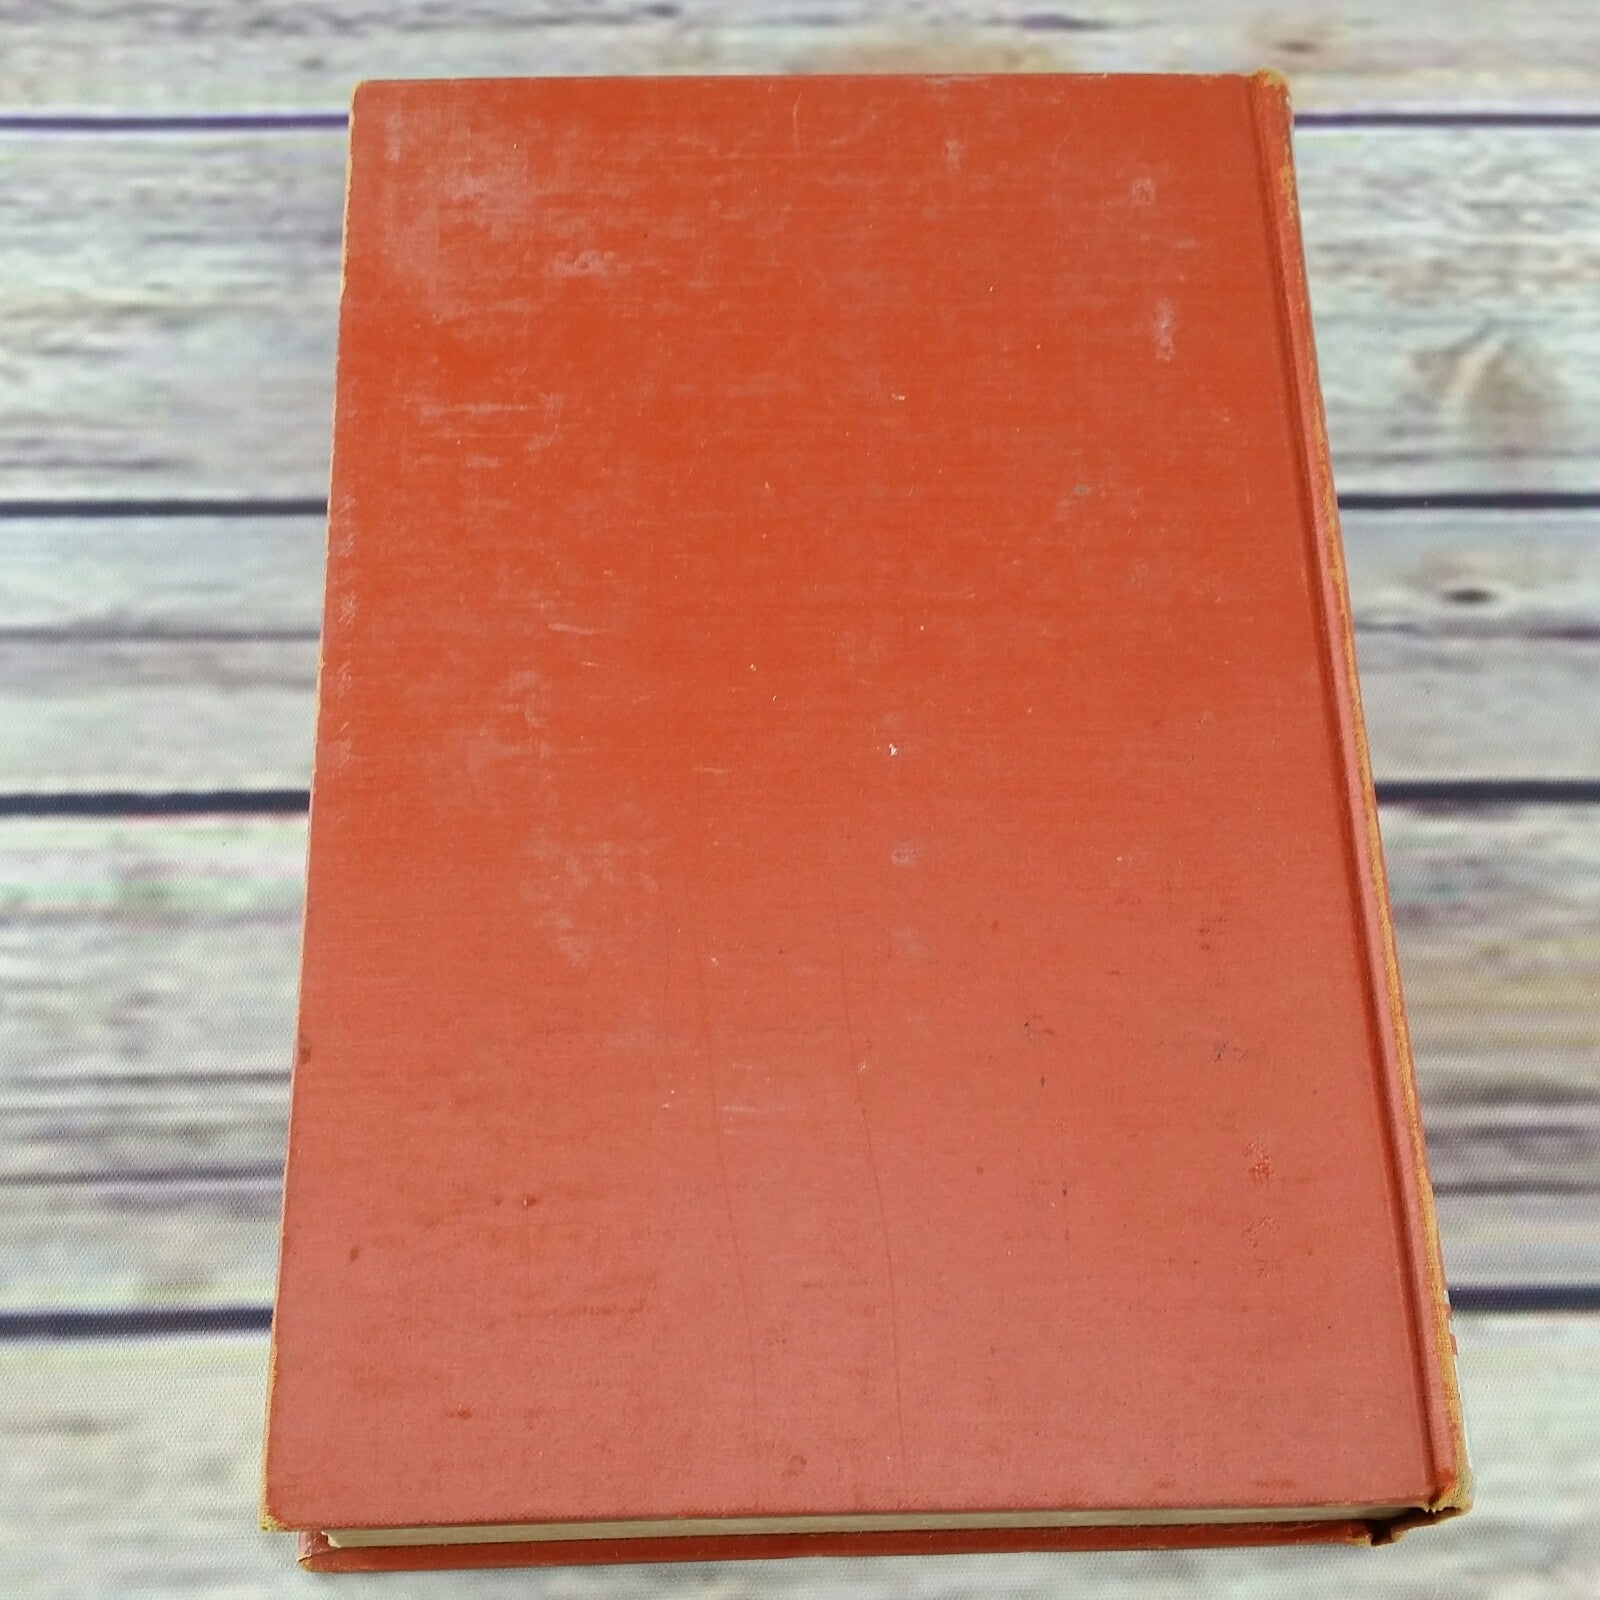 Vintage Cookbook Quality Cook Book Modern Cooking 1932 Hardcover No Dust Jacket Dorothy Fitzgerald - At Grandma's Table